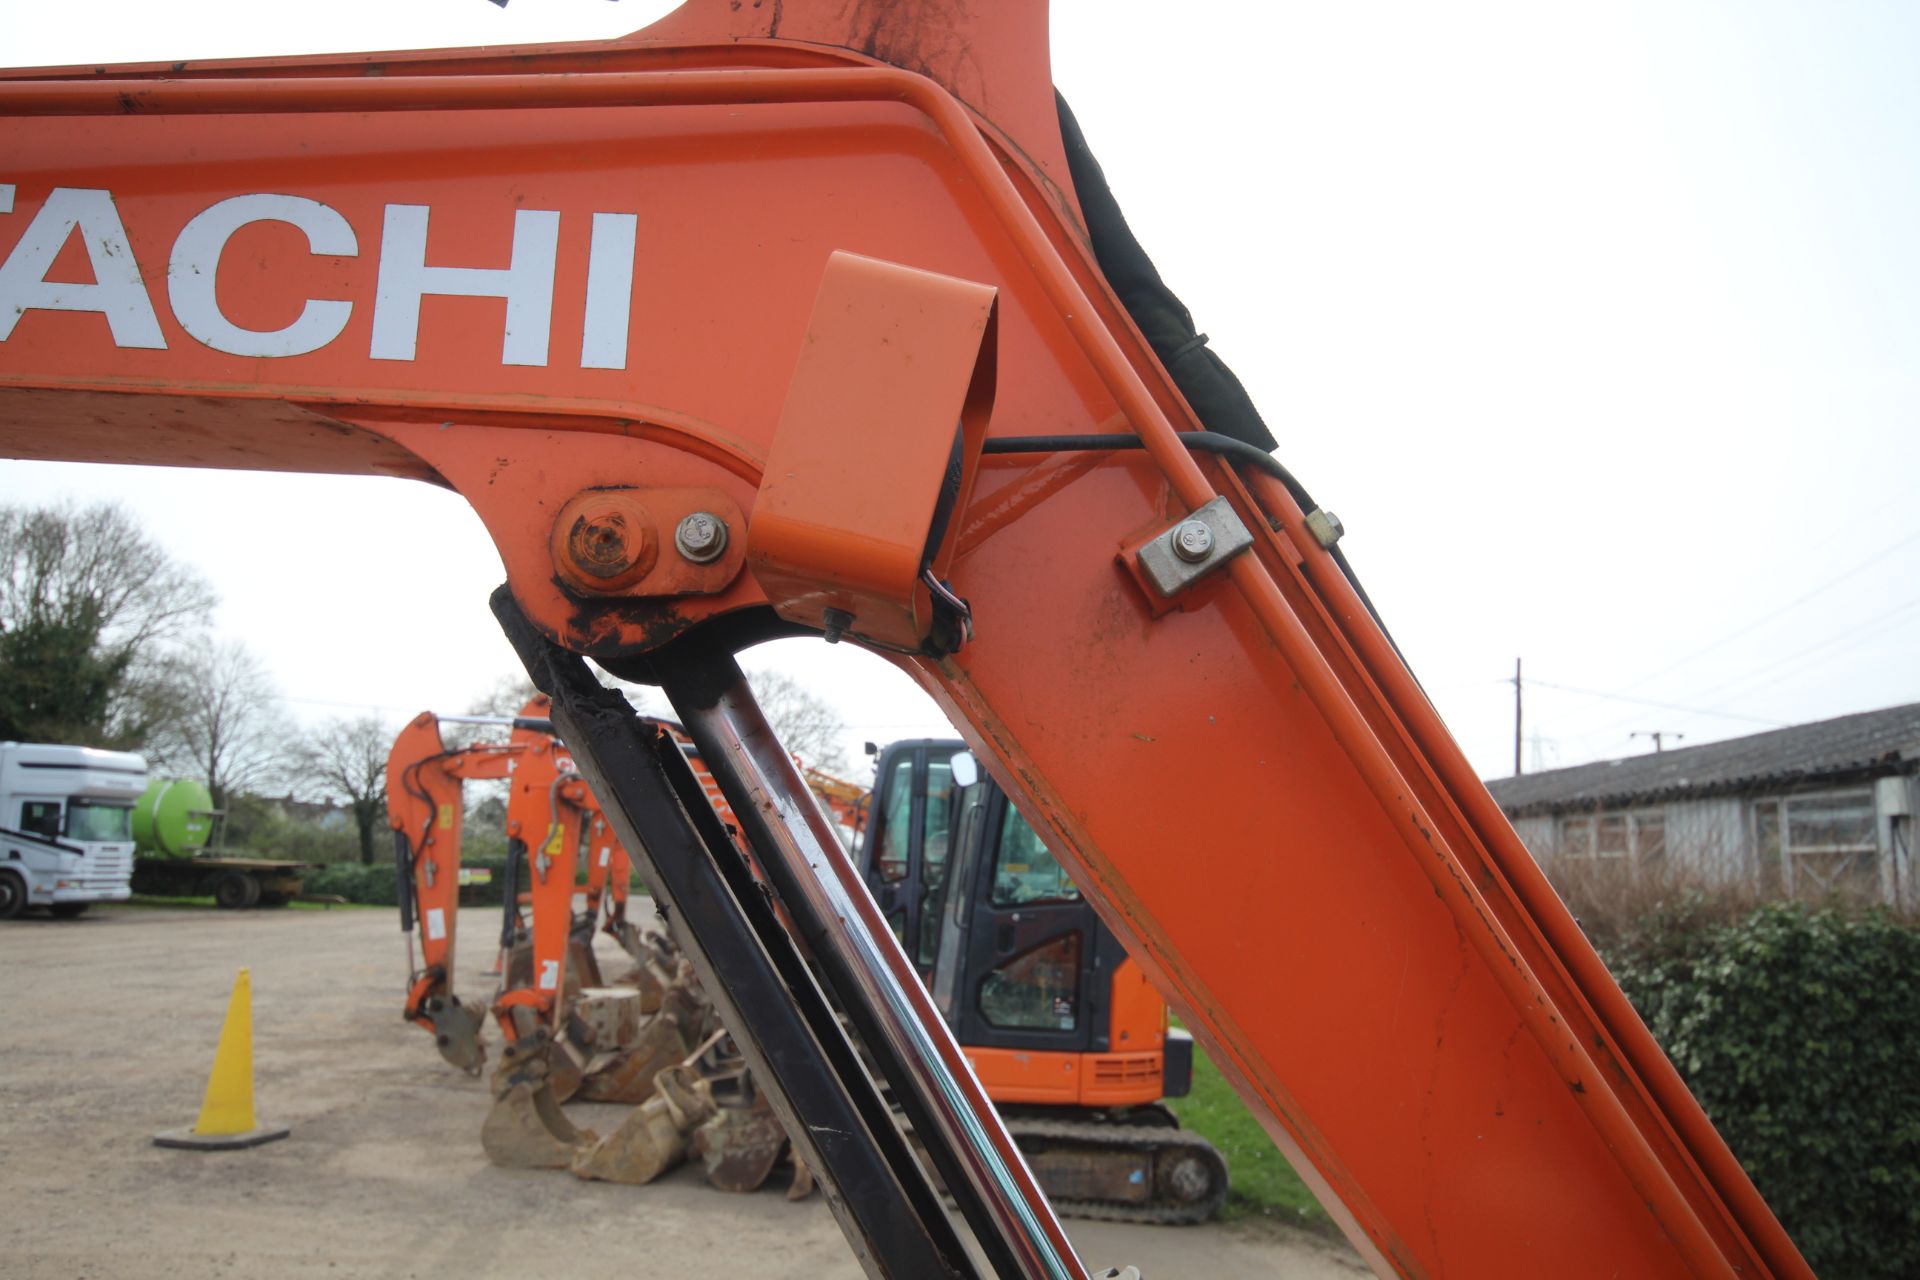 Hitachi Z-Axis 26U-5a 2.6T rubber track excavator. 2018. 2,061 hours. Serial number HCM - Image 36 of 61